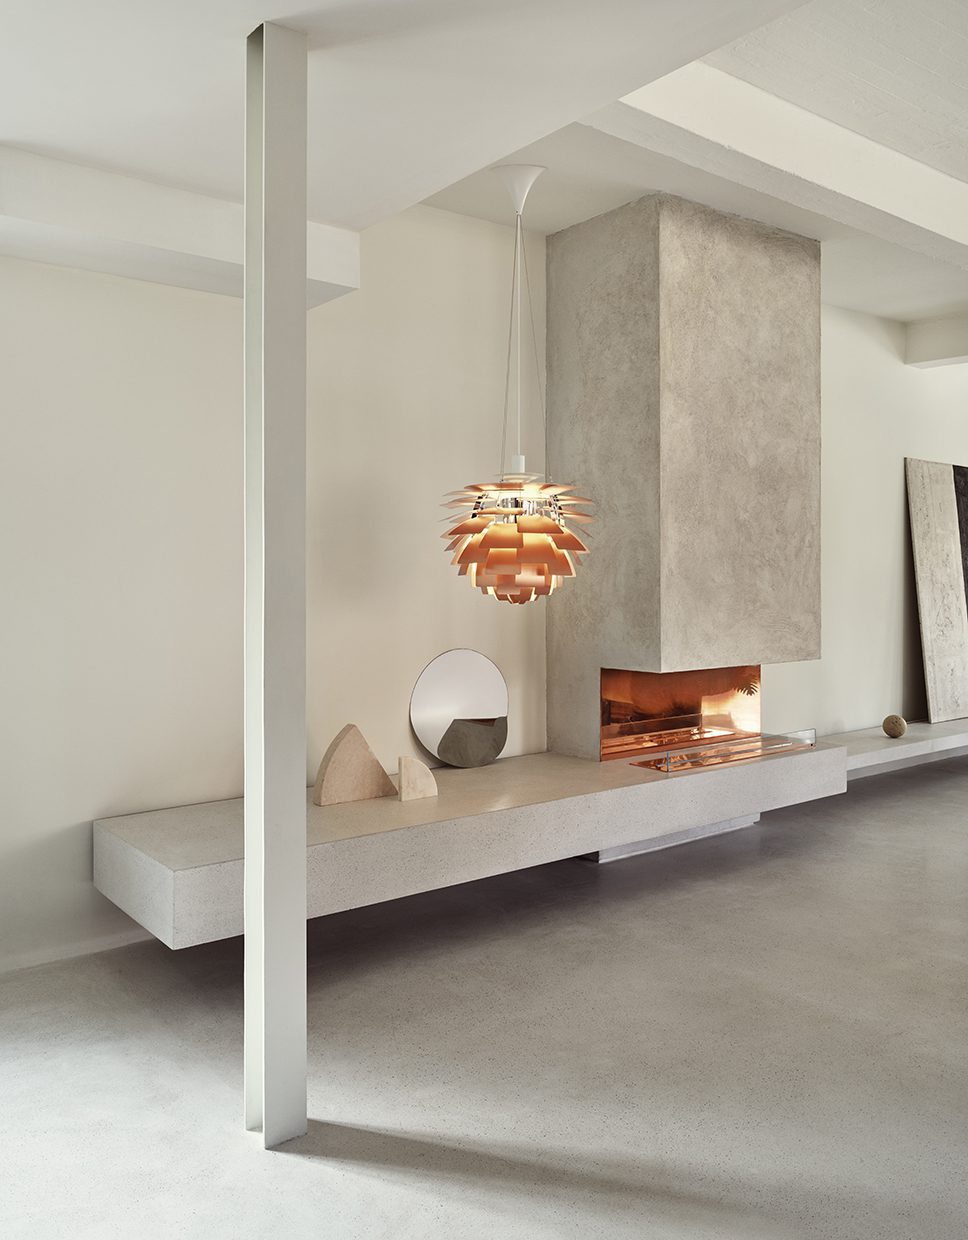 the modern archive - Snowball Pendant Lamp by Poul Henningsen